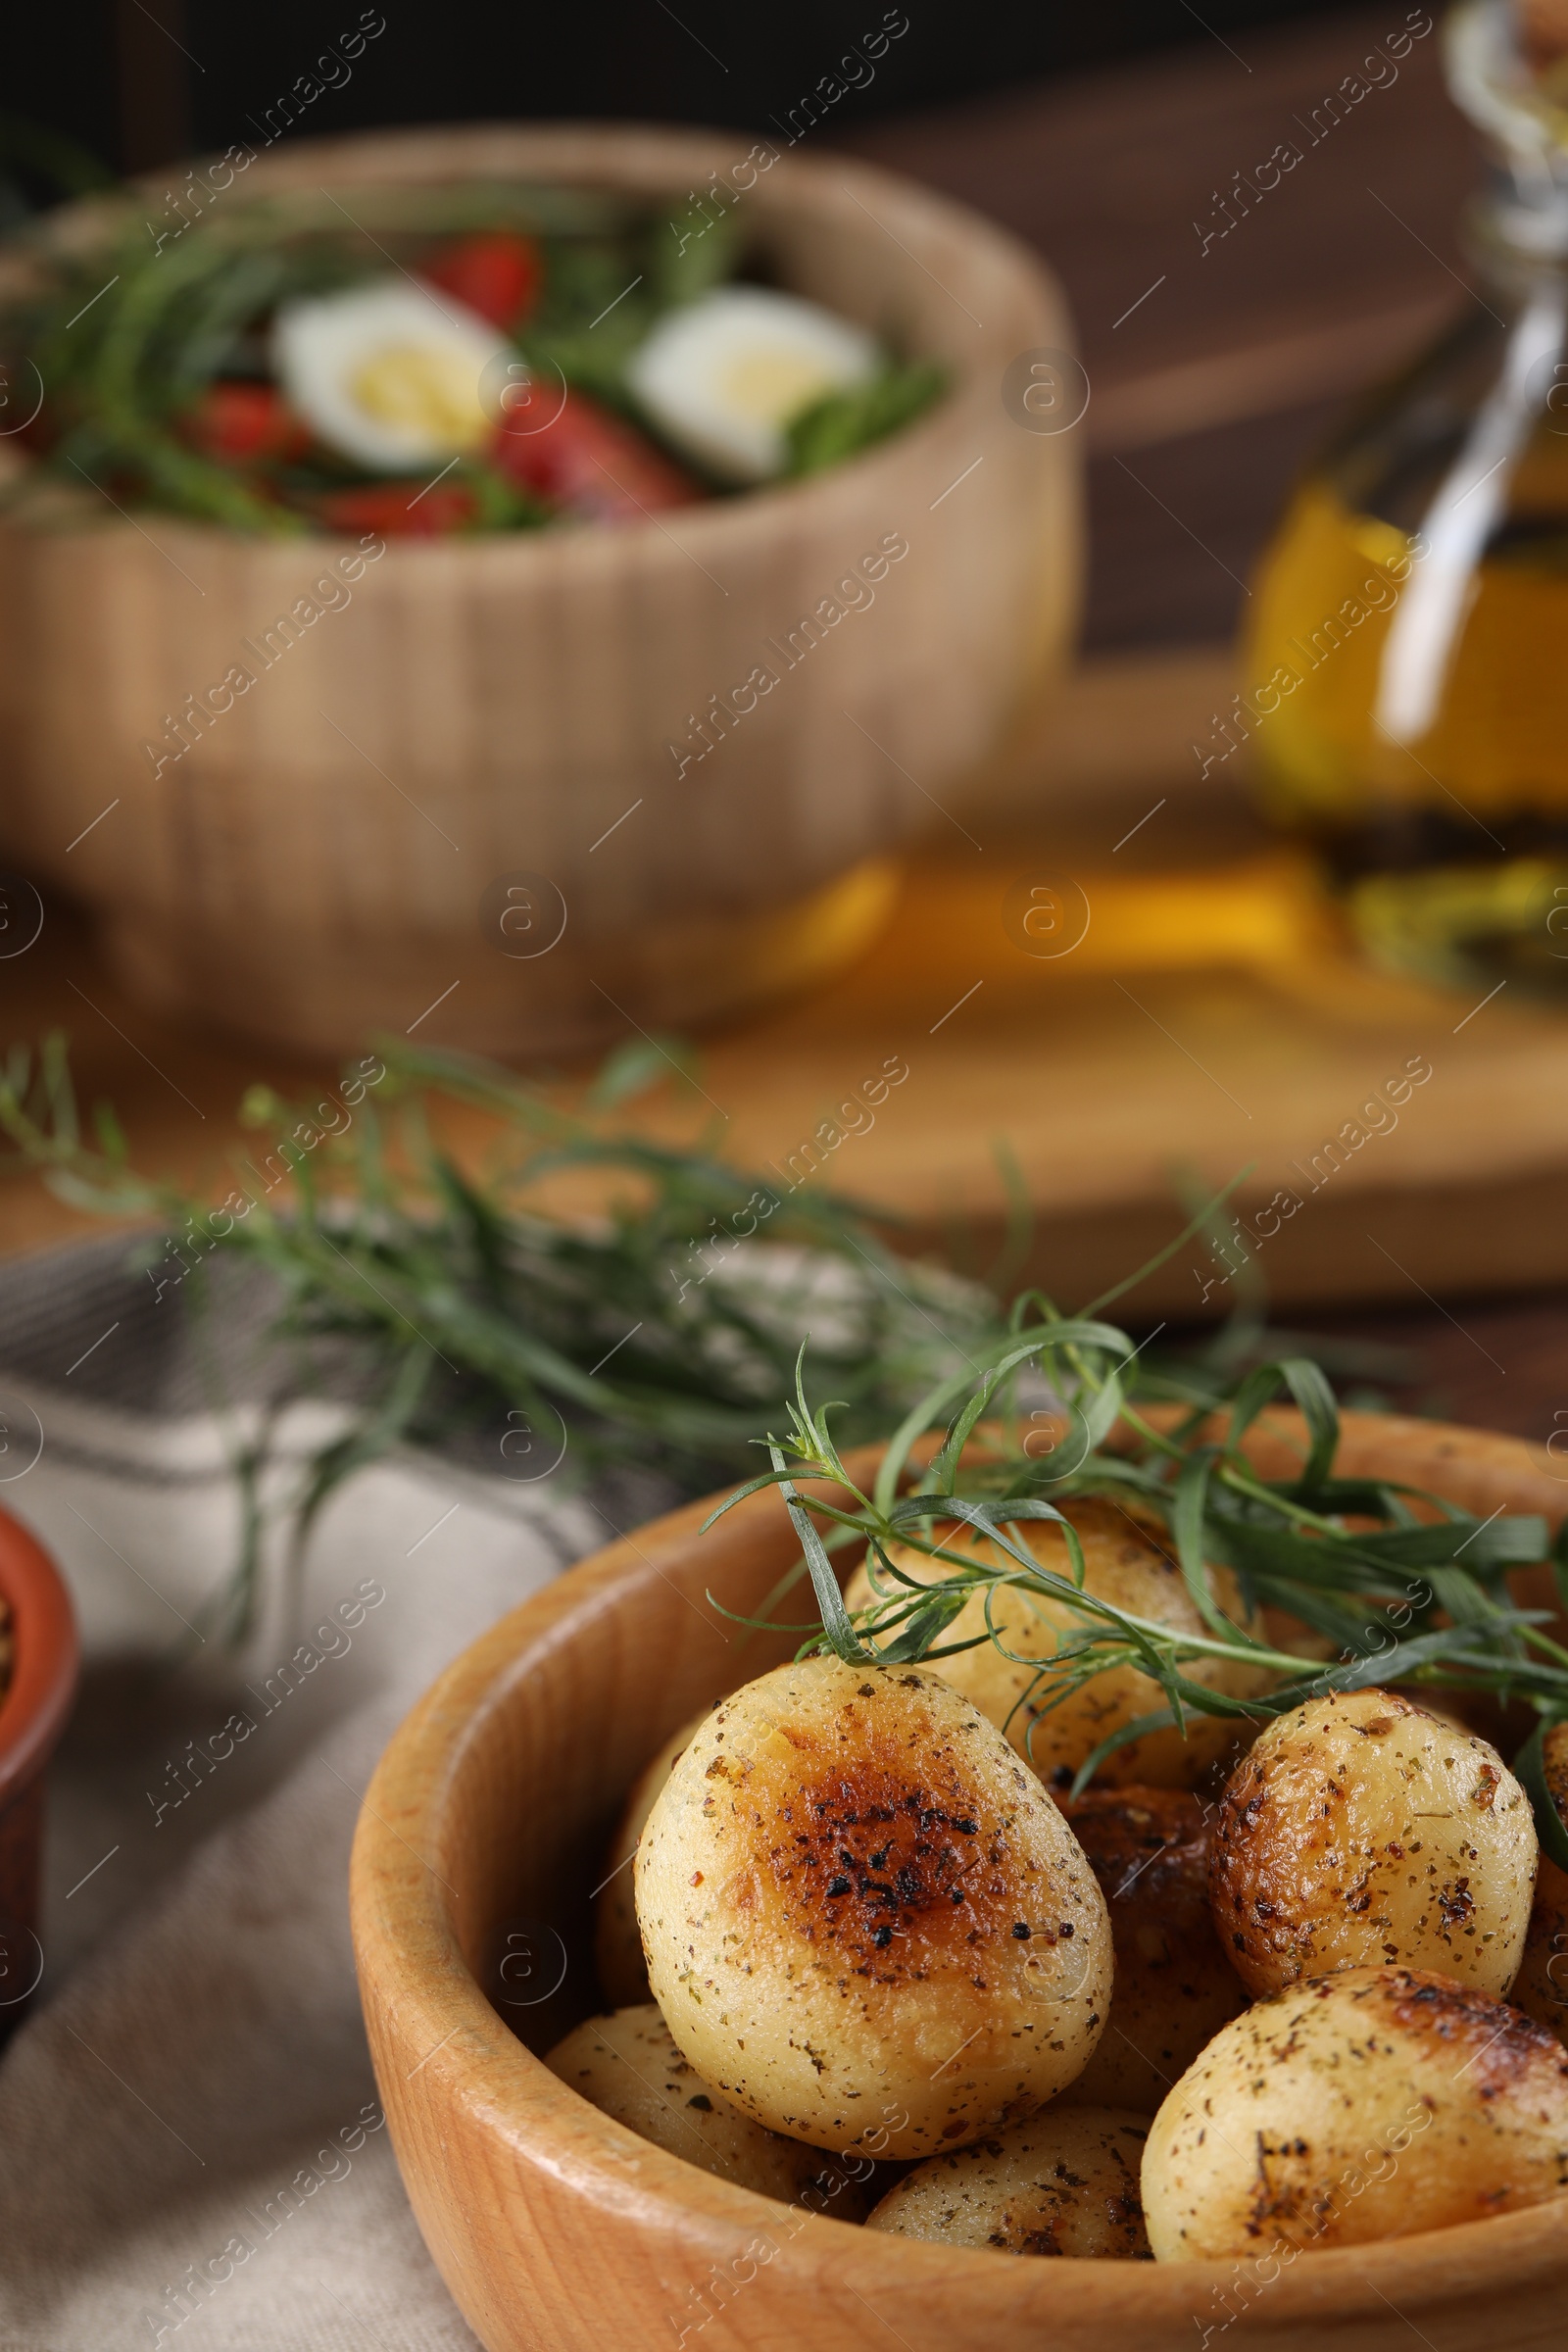 Photo of Delicious grilled potatoes with tarragon and salad on table, selective focus